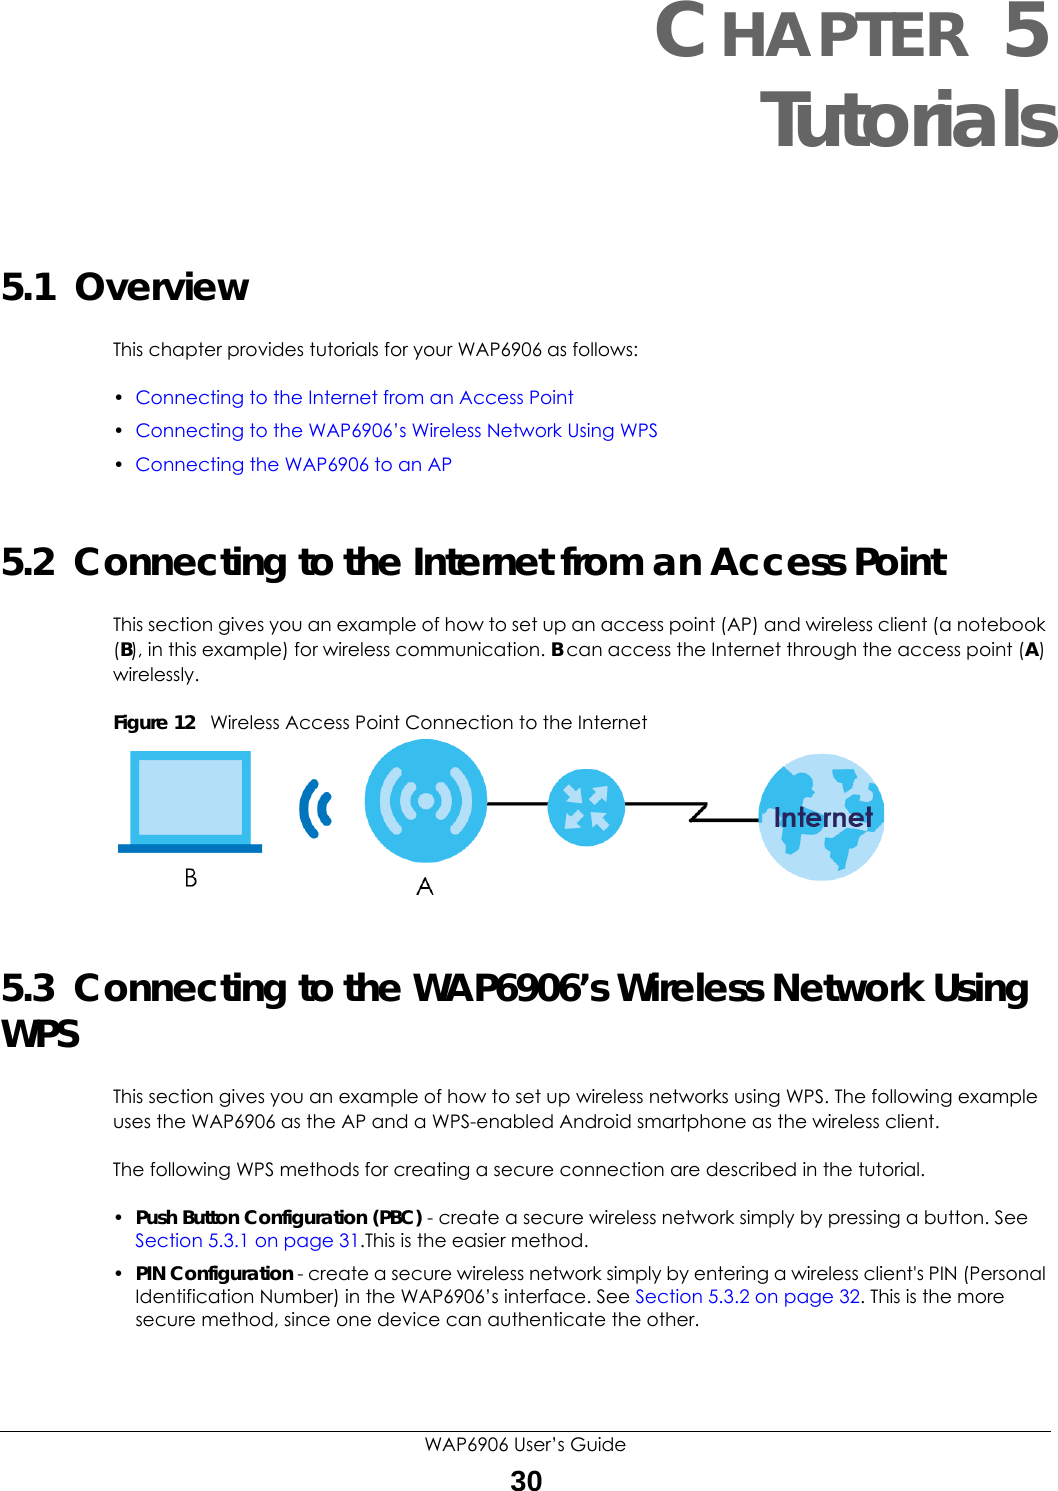 WAP6906 User’s Guide30CHAPTER 5Tutorials5.1  OverviewThis chapter provides tutorials for your WAP6906 as follows:•Connecting to the Internet from an Access Point•Connecting to the WAP6906’s Wireless Network Using WPS•Connecting the WAP6906 to an AP5.2  Connecting to the Internet from an Access PointThis section gives you an example of how to set up an access point (AP) and wireless client (a notebook (B), in this example) for wireless communication. B can access the Internet through the access point (A) wirelessly.Figure 12   Wireless Access Point Connection to the Internet5.3  Connecting to the WAP6906’s Wireless Network Using WPSThis section gives you an example of how to set up wireless networks using WPS. The following example uses the WAP6906 as the AP and a WPS-enabled Android smartphone as the wireless client. The following WPS methods for creating a secure connection are described in the tutorial.•Push Button Configuration (PBC) - create a secure wireless network simply by pressing a button. See Section 5.3.1 on page 31.This is the easier method.•PIN Configuration - create a secure wireless network simply by entering a wireless client&apos;s PIN (Personal Identification Number) in the WAP6906’s interface. See Section 5.3.2 on page 32. This is the more secure method, since one device can authenticate the other.